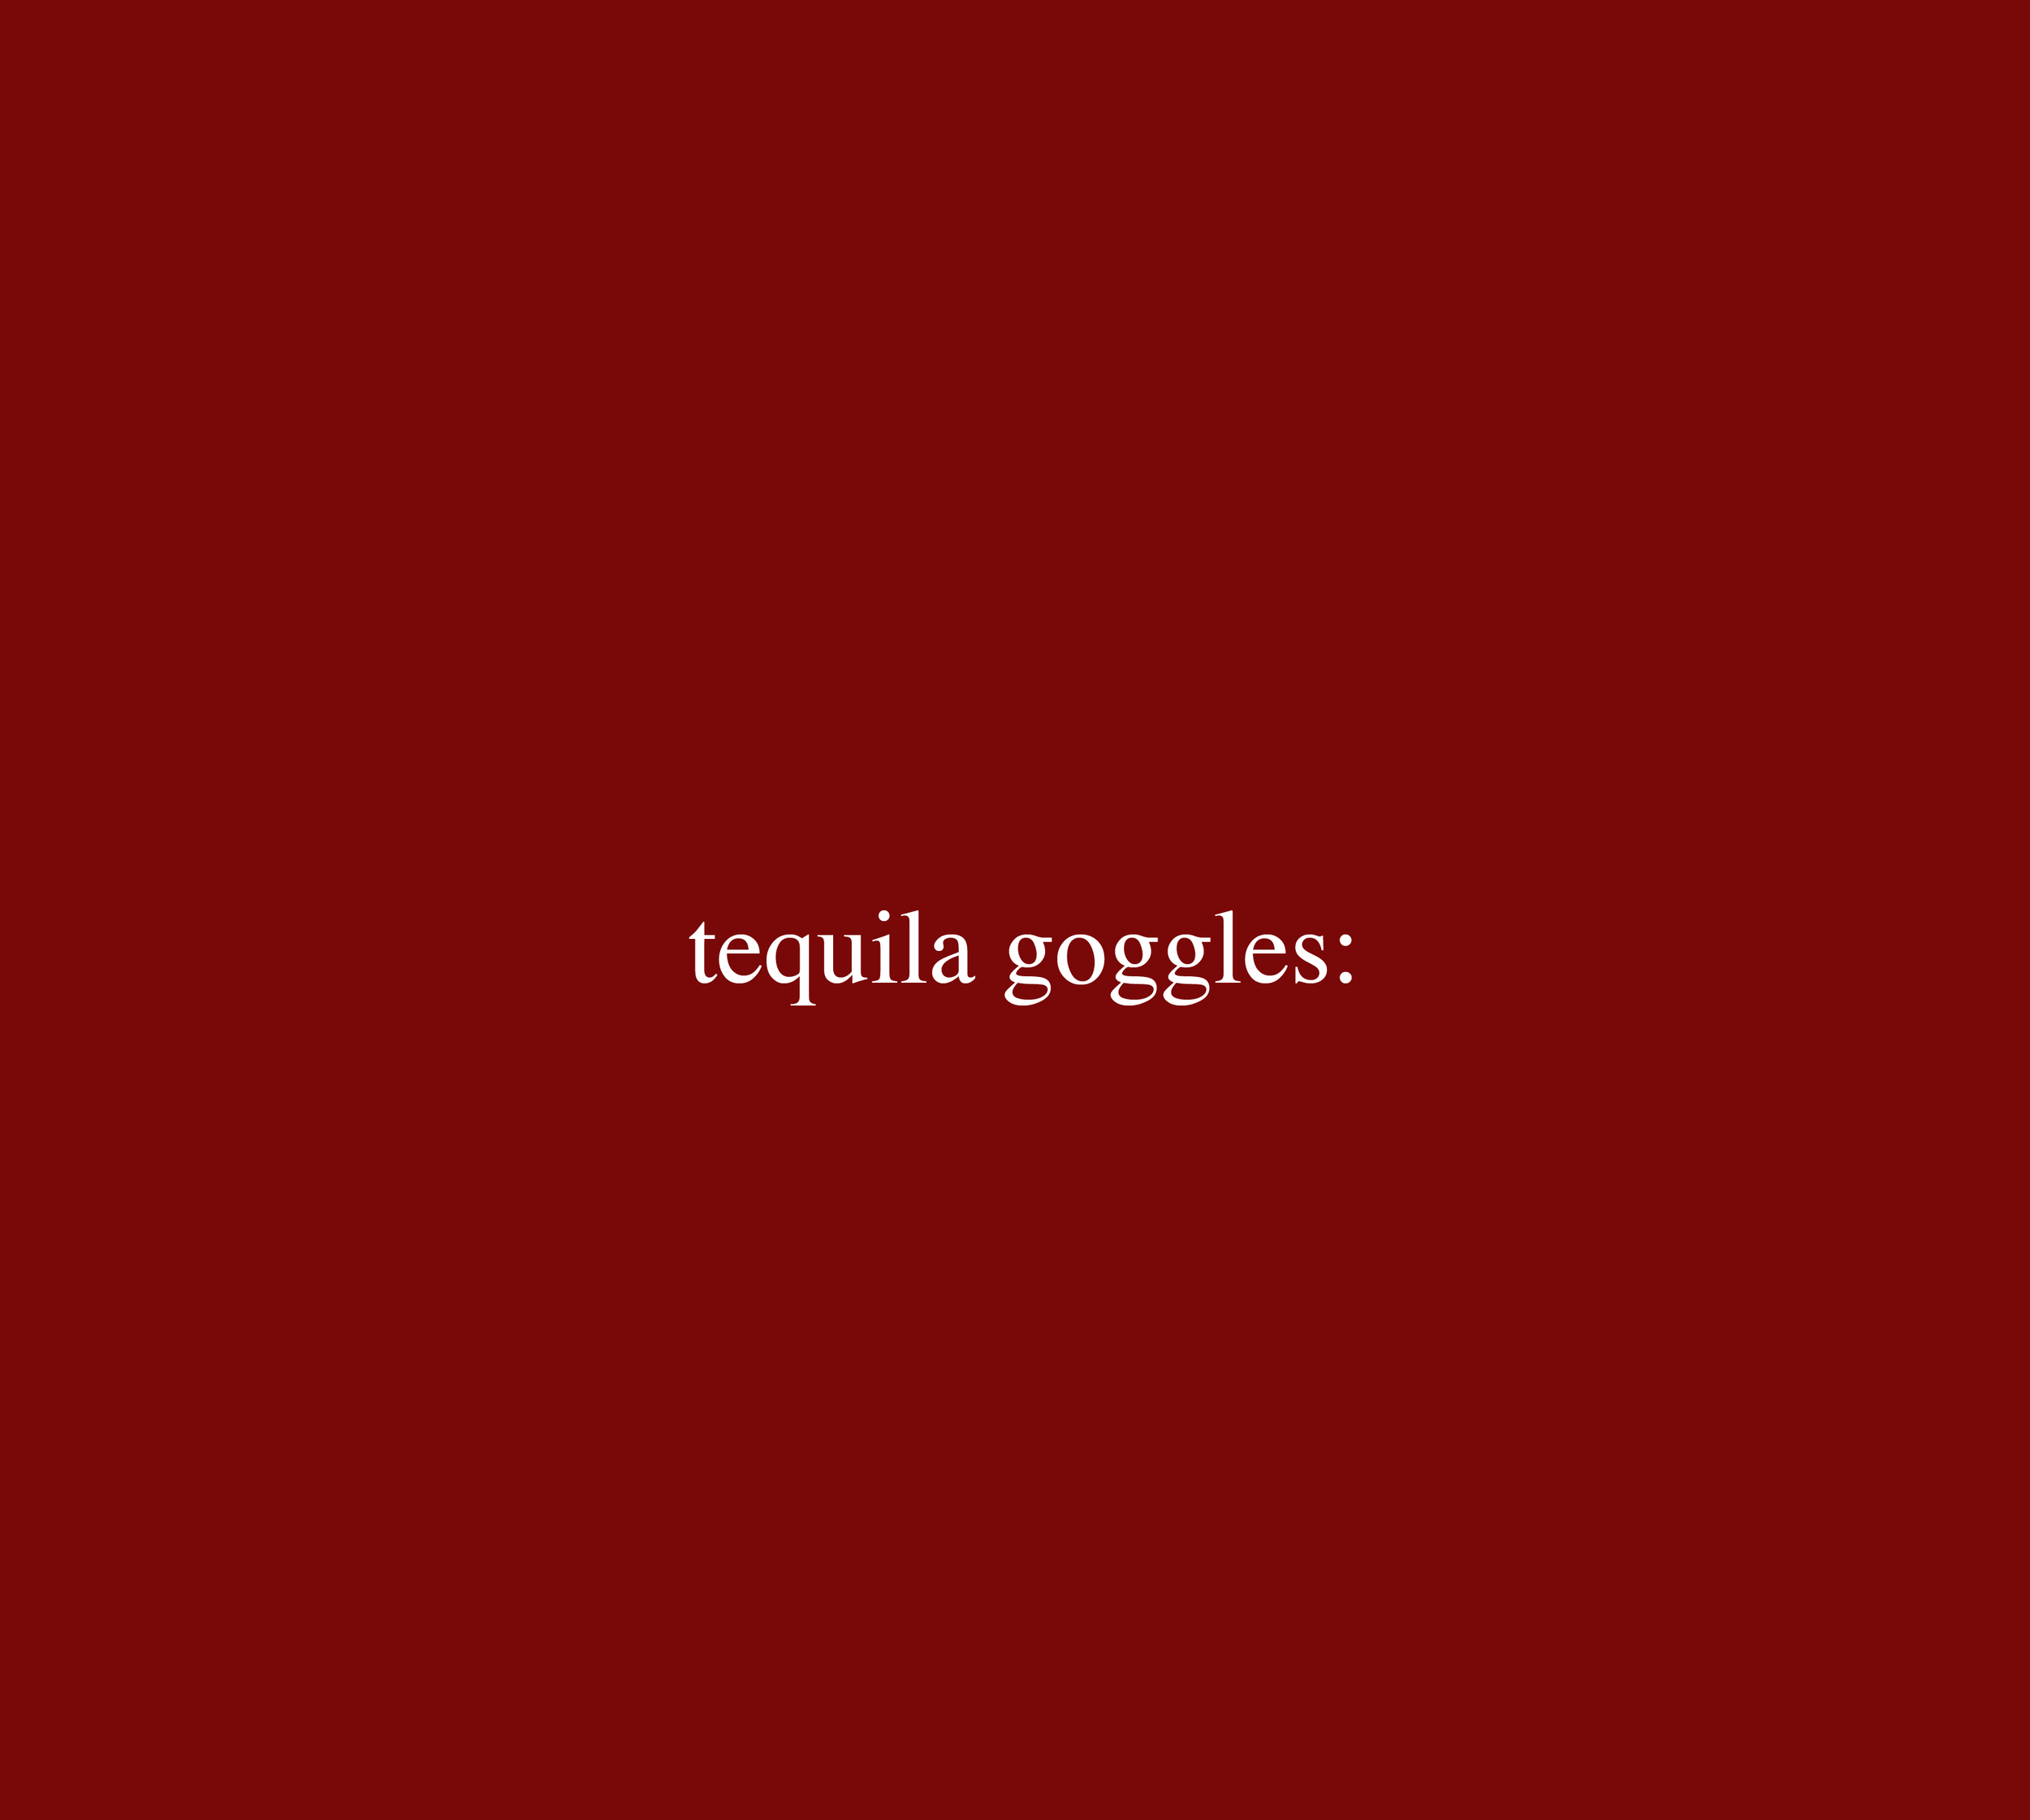 tequila goggles section matilda.jpg